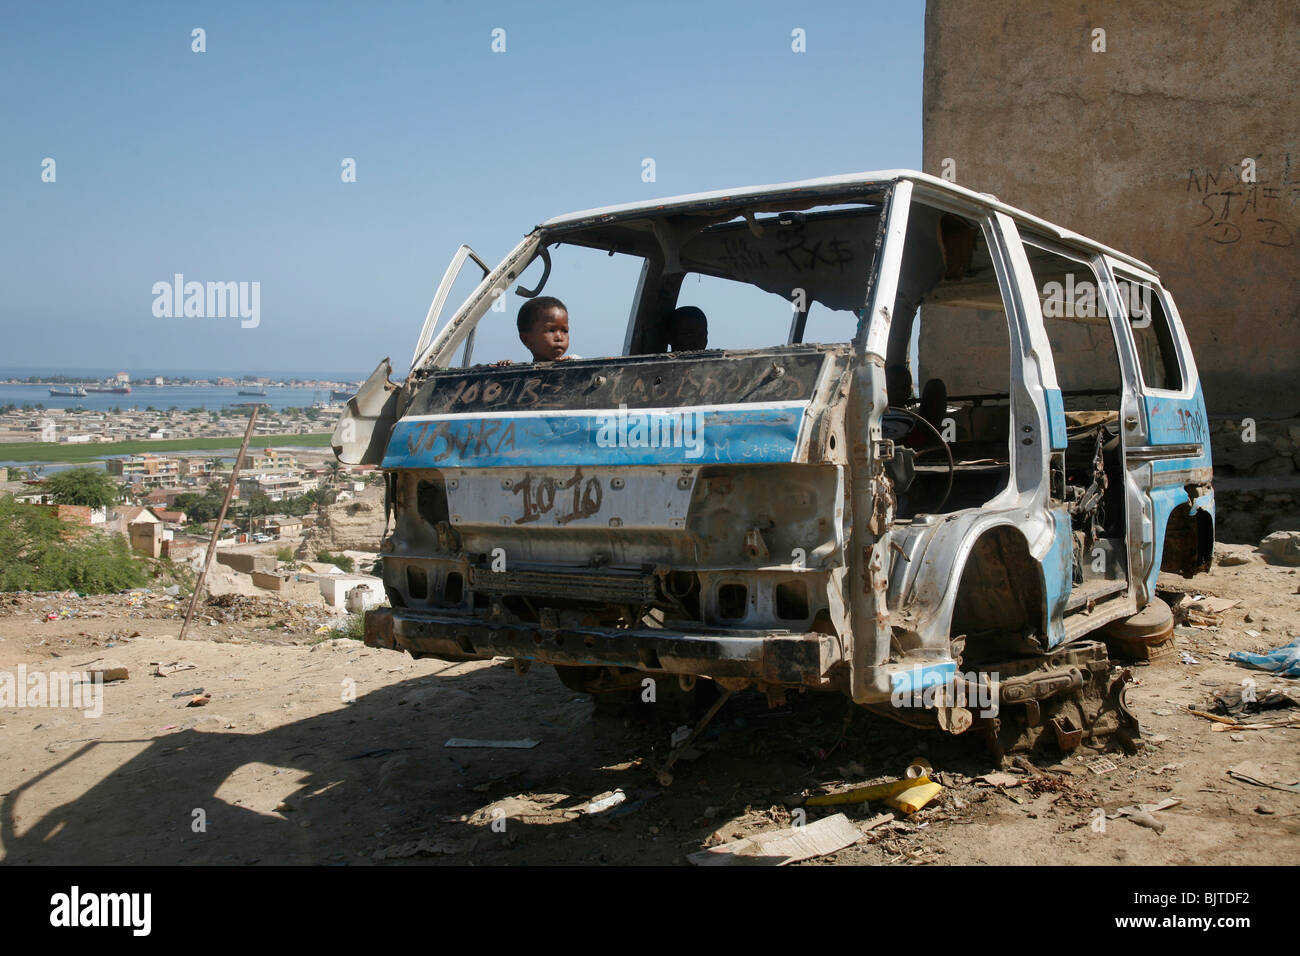 Child playing in remains of a stripped down minibus taxi. Barrio area on the hills north of Lobito. Benguela Province. Angola. A Stock Photo